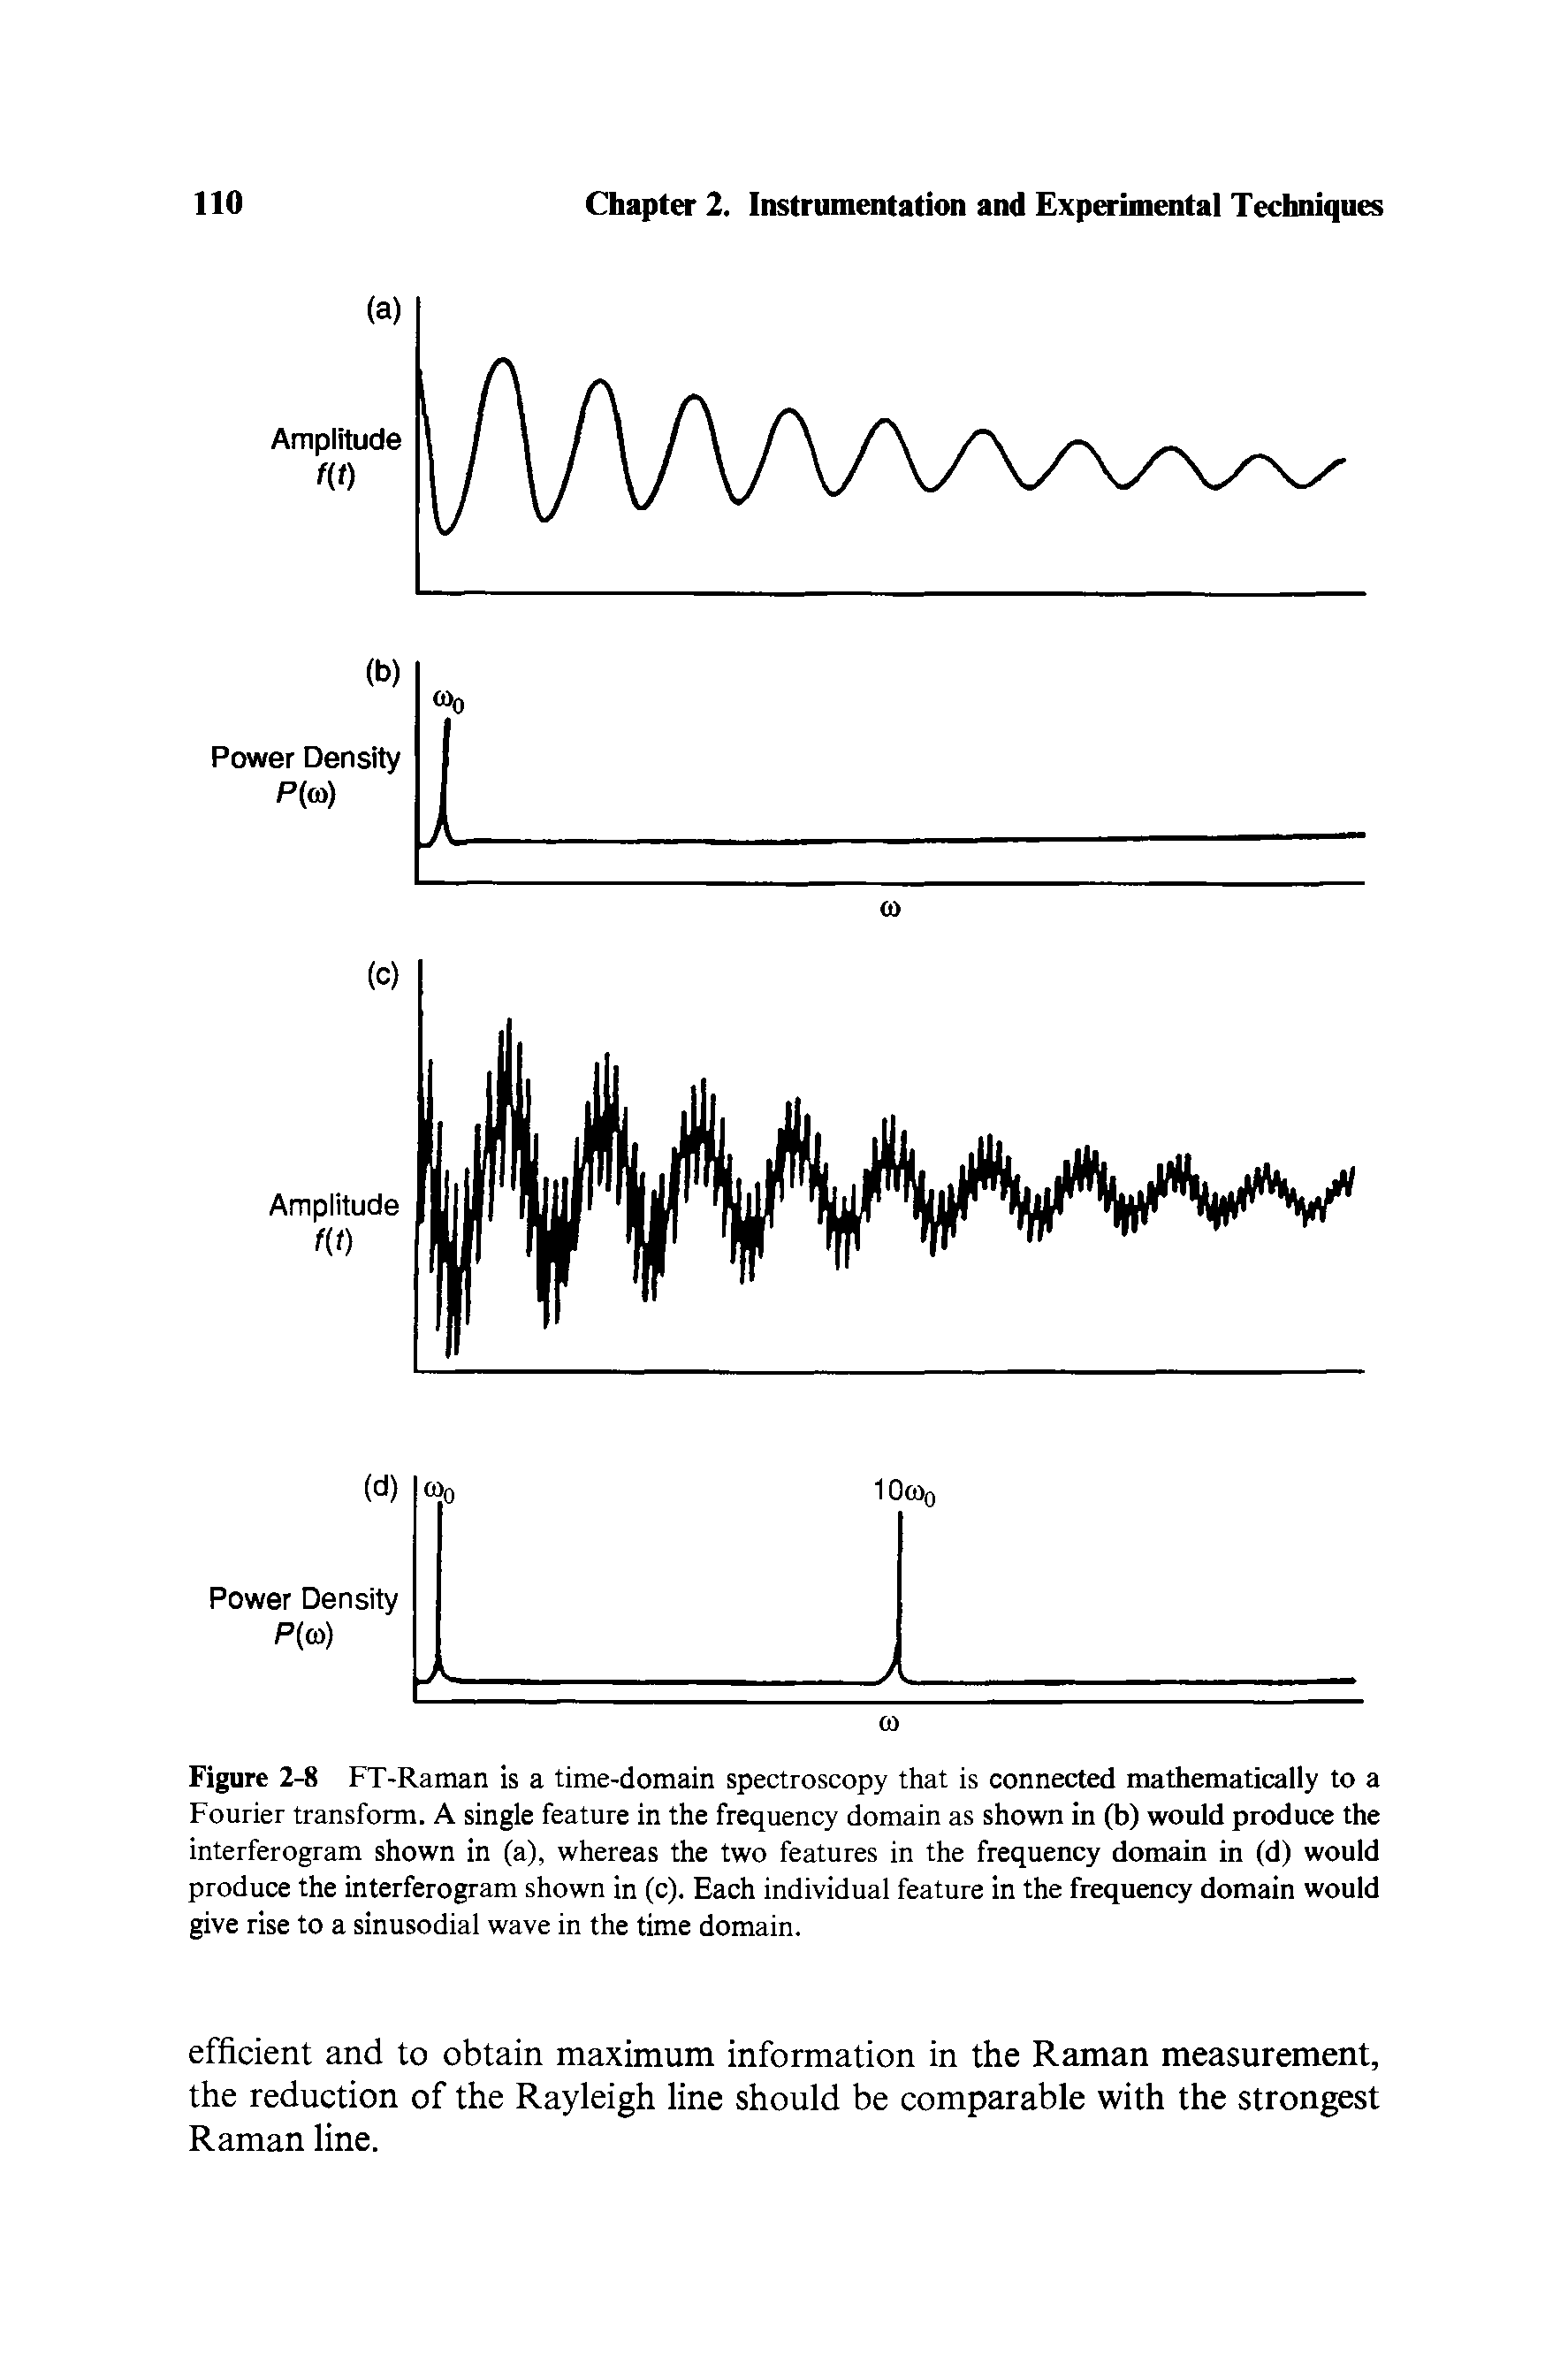 Figure 2-8 FT-Raman is a time-domain spectroscopy that is connected mathematically to a Fourier transform. A single feature in the frequency domain as shown in (b) would produce the interferogram shown in (a), whereas the two features in the frequency domain in (d) would produce the interferogram shown in (c). Each individual feature in the frequency domain would give rise to a sinusodial wave in the time domain.